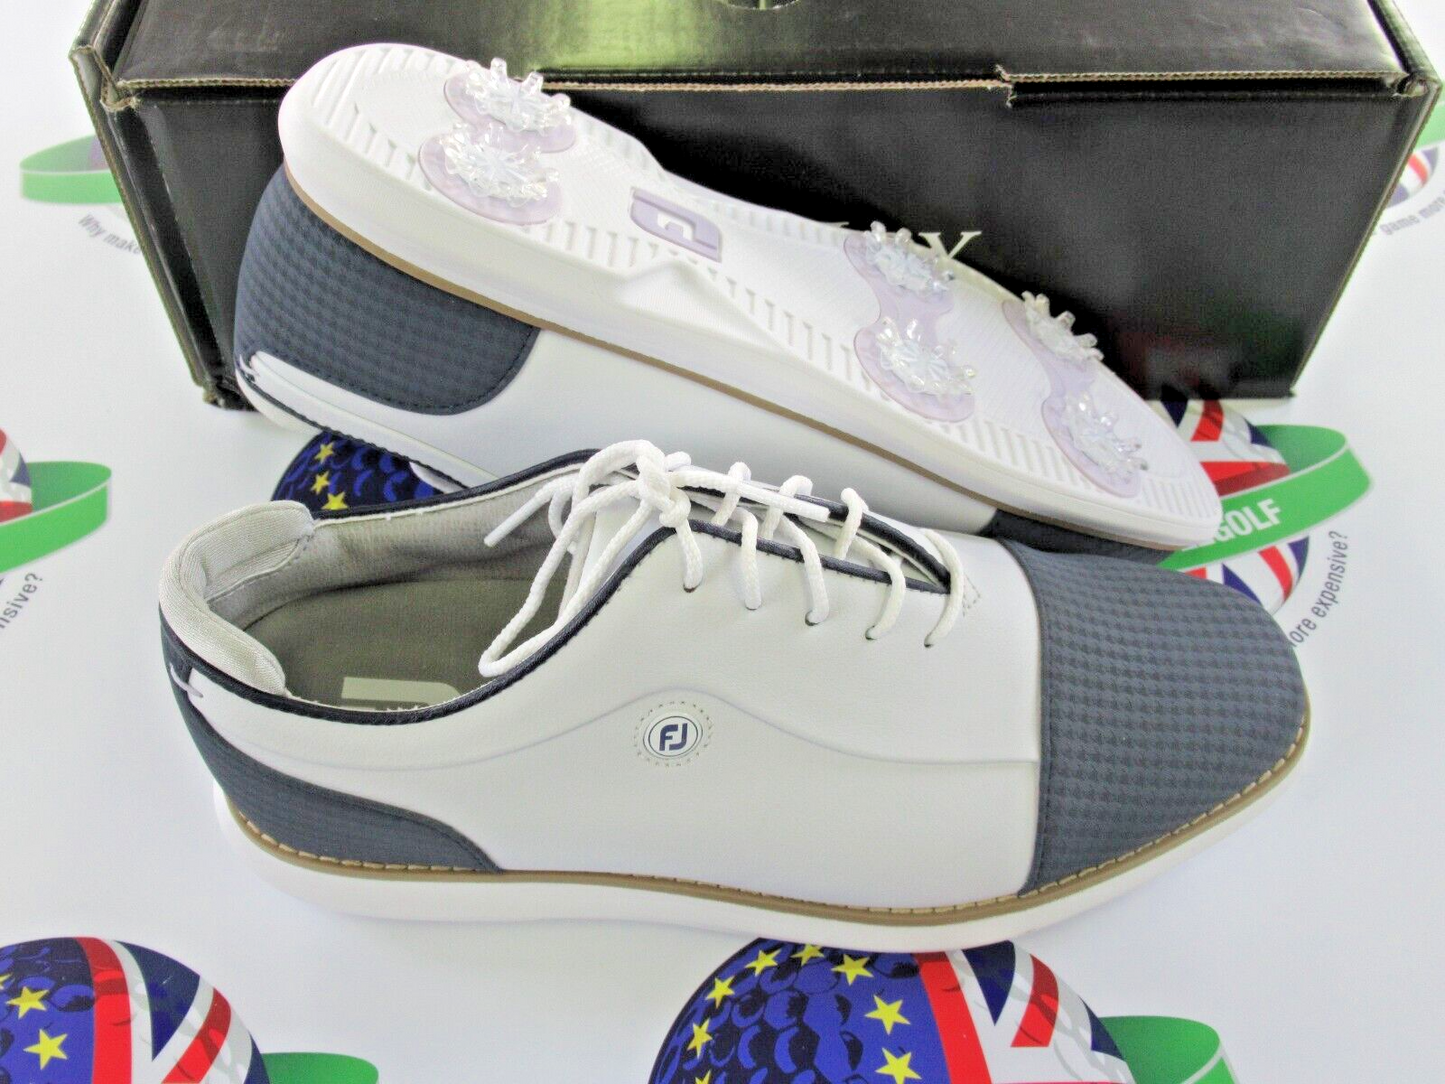 footjoy fj traditions womens golf shoes 97915k white/navy size 4.5 wide/large